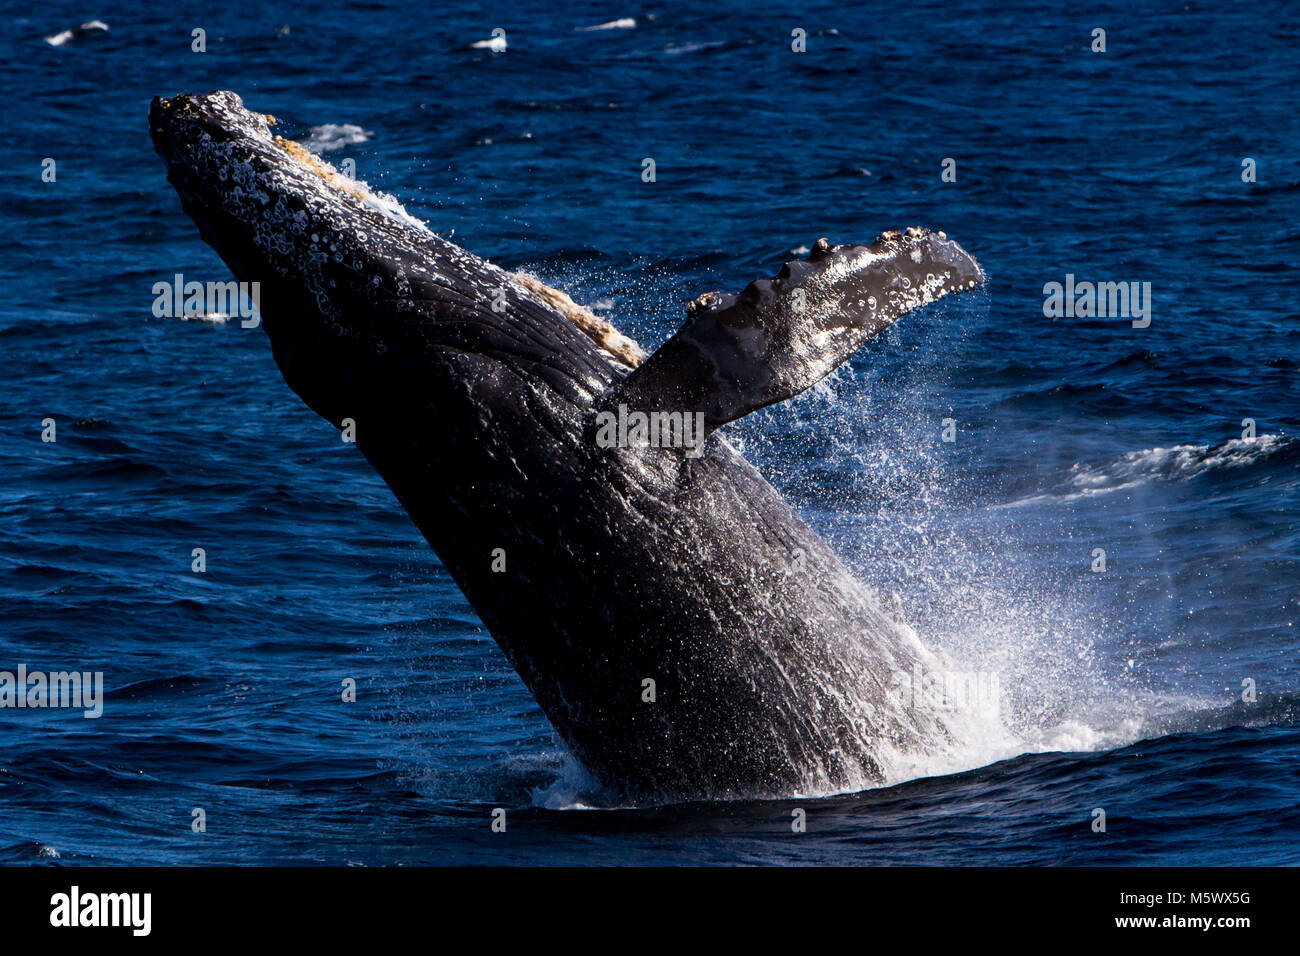 Humpback whale breaching off of Cabo San Lucas in Baja, Mexico Stock Photo